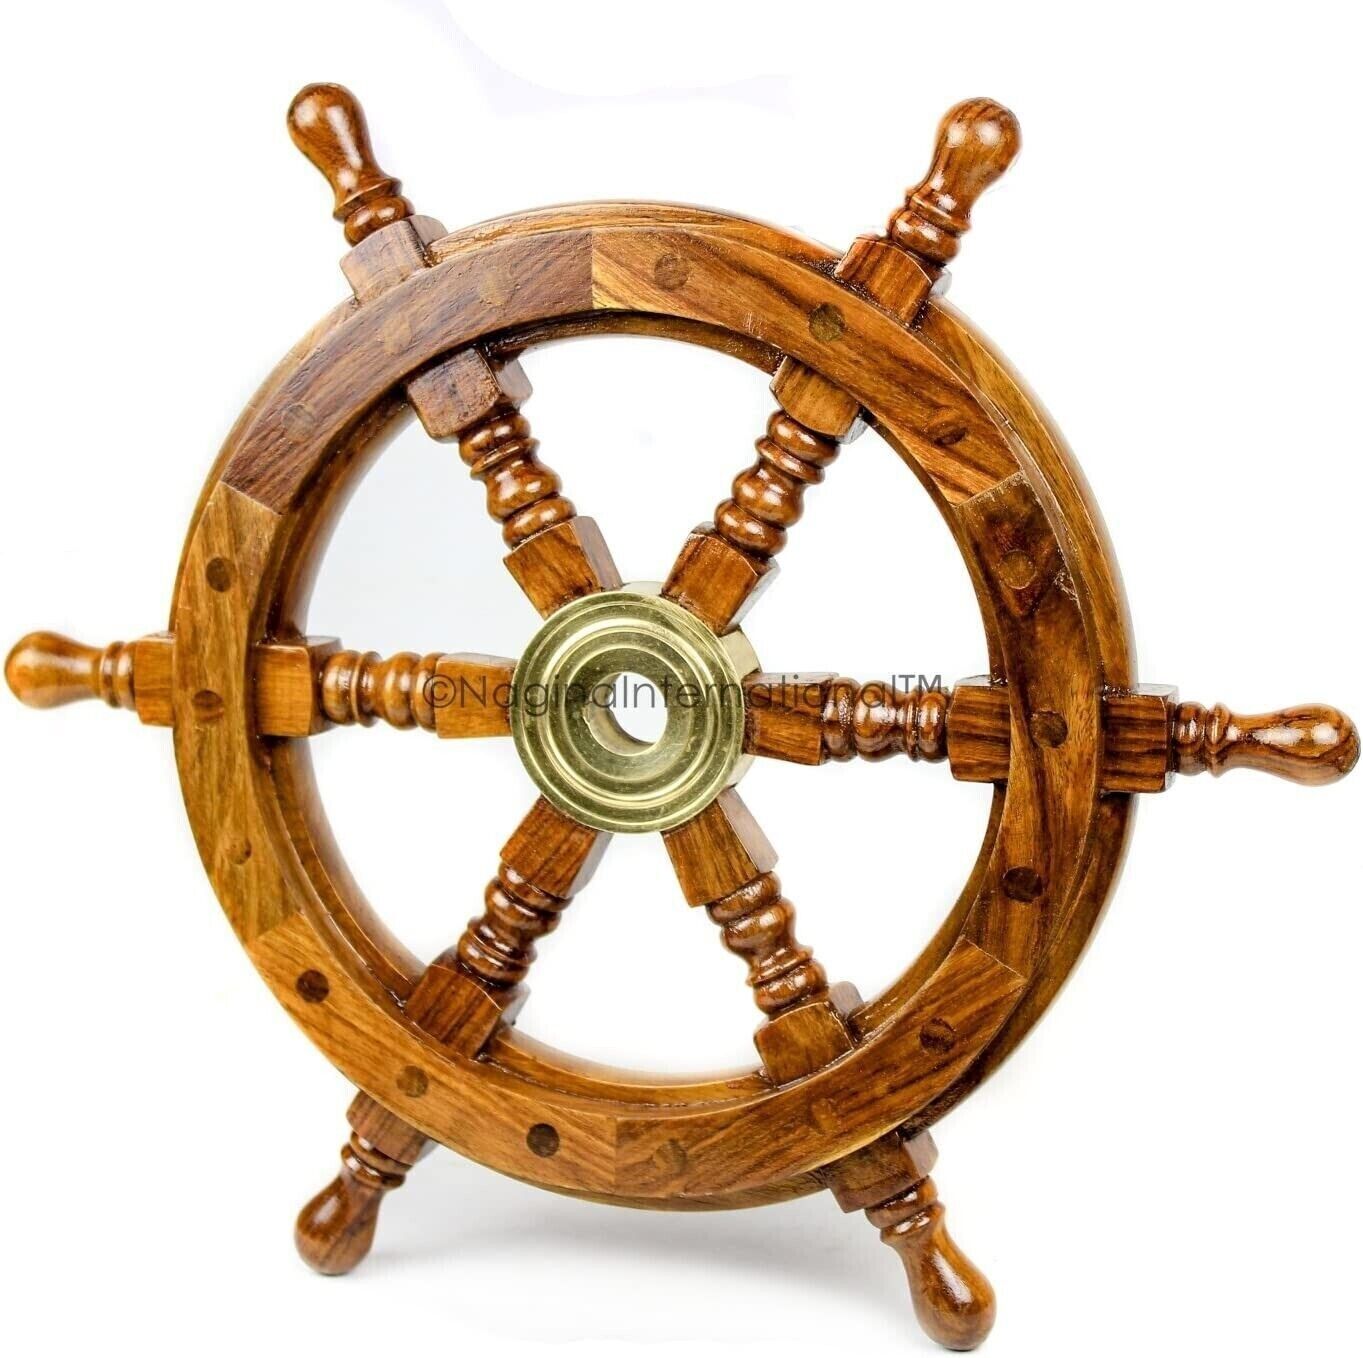 Nautical 18 Inches Collectible Boat Ship Wheel Wooden Steering Home Decor